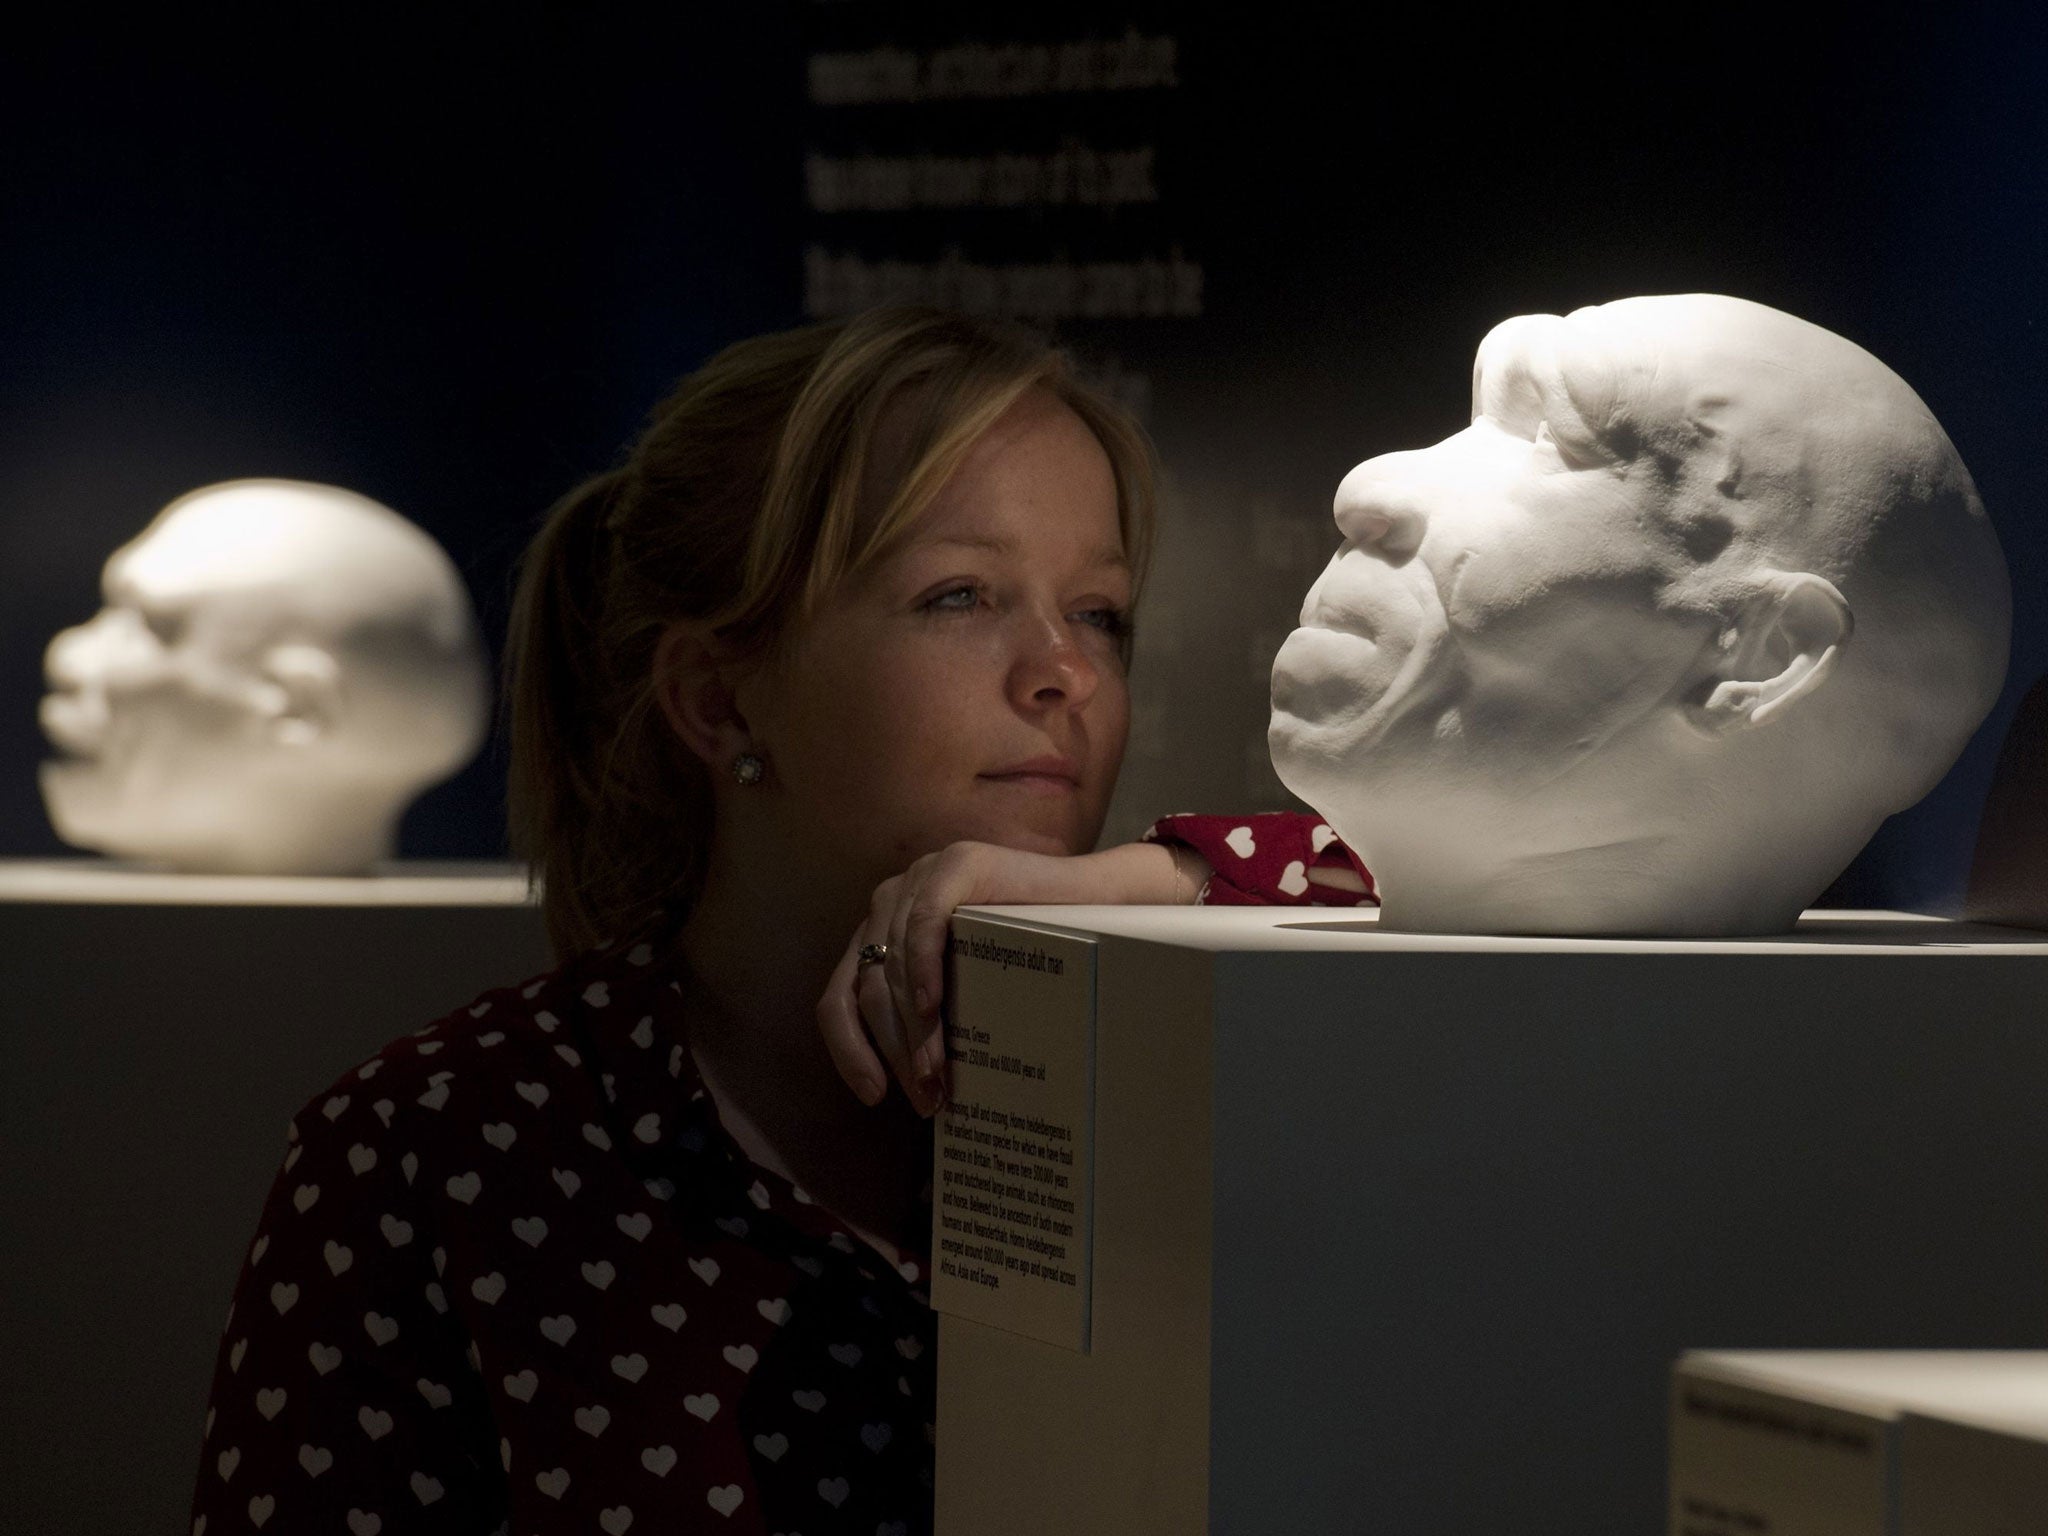 An employee of the Natural History Museum in London looks at casts of some of the ancestors of the human race that used to live in the British Isles over half a million years ago